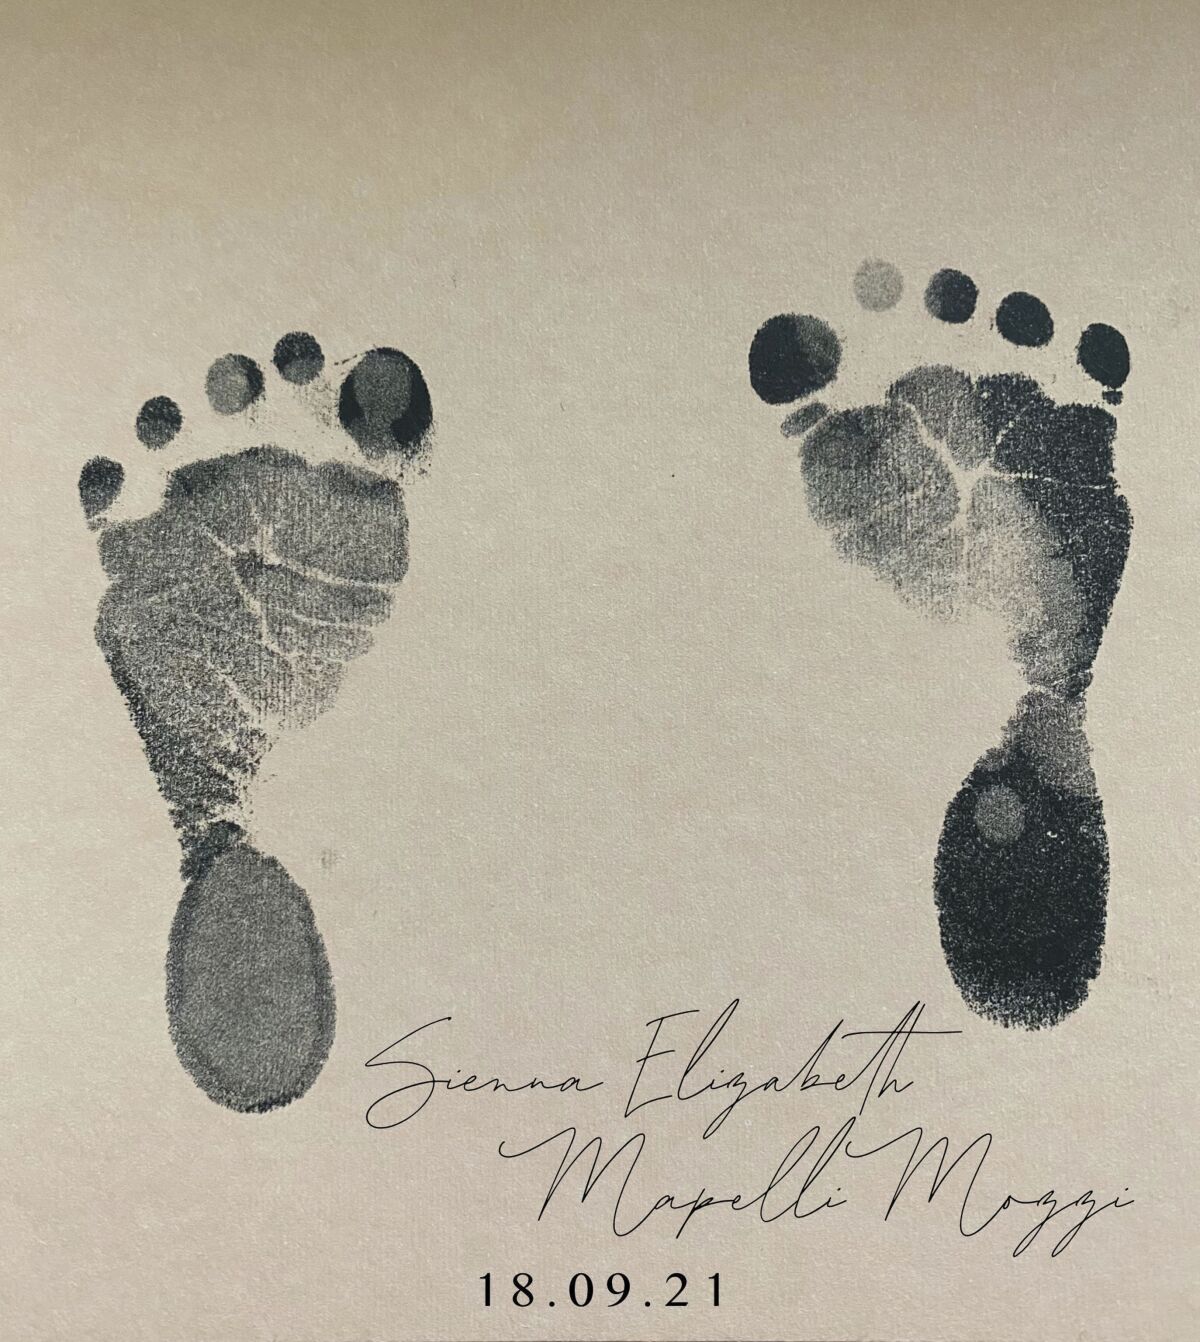 This undated handout photo provided by Buckingham Palace on Friday, Oct. 1, 2021 shows the footprint and name of the daughter of Britain's Princess Beatrice. Princess Beatrice and her husband Edoardo Mapelli Mozzi have named their newborn daughter Sienna Elizabeth. In a tweet Friday, Beatrice revealed the name alongside a picture of Sienna Elizabeth’s footprints. (Princess Beatrice and Edoardo Mapelli Mozzi/Buckingham Palace via AP)